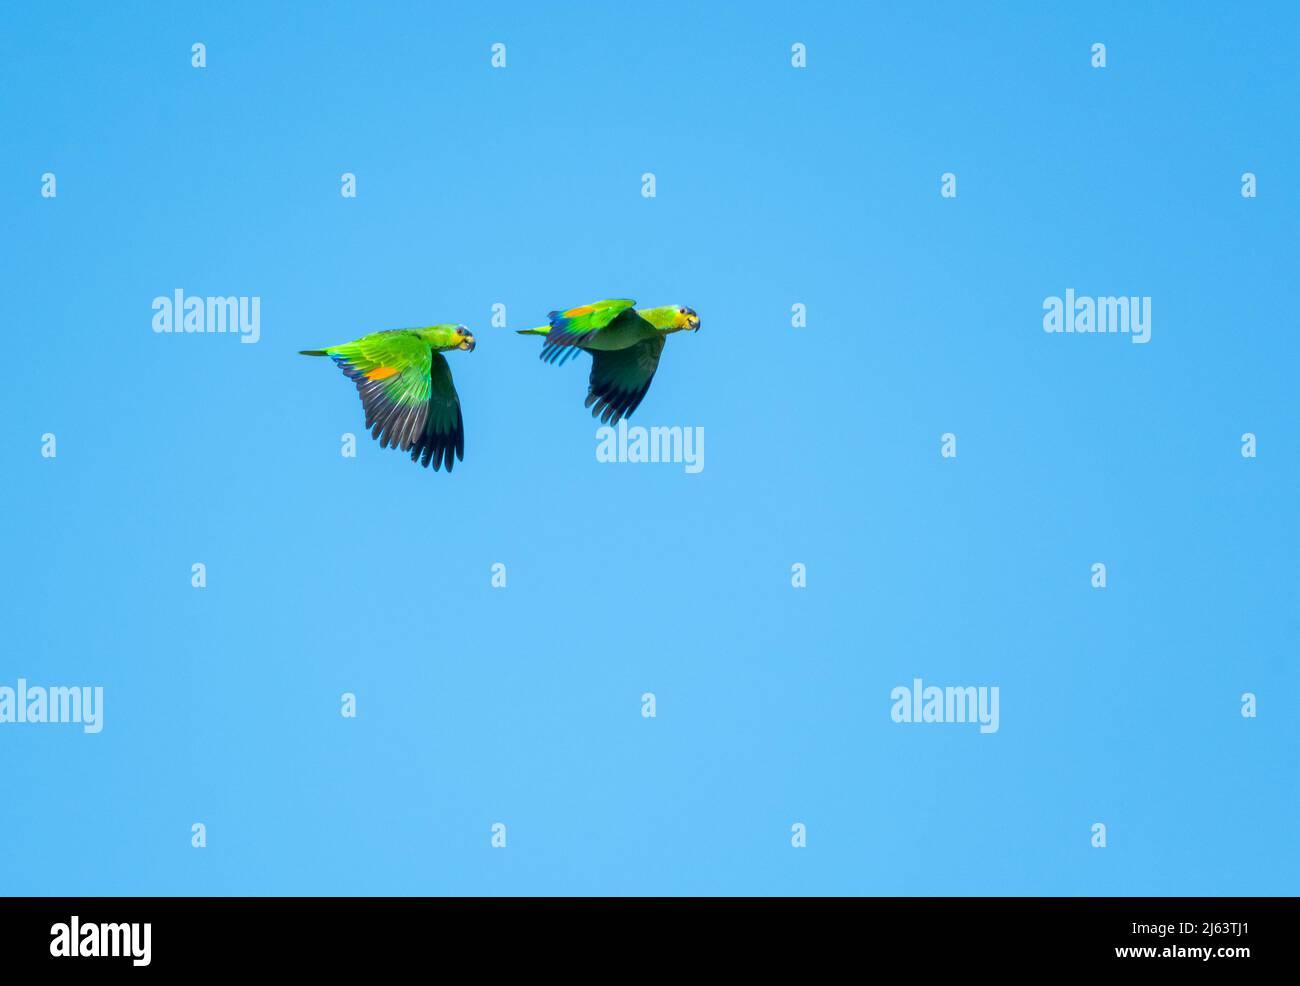 Pair of Orange-winged Amazon parrots, Amazona amazonica, flying in the clear blue sky, bright sunlight. Birds in wild. Stock Photo